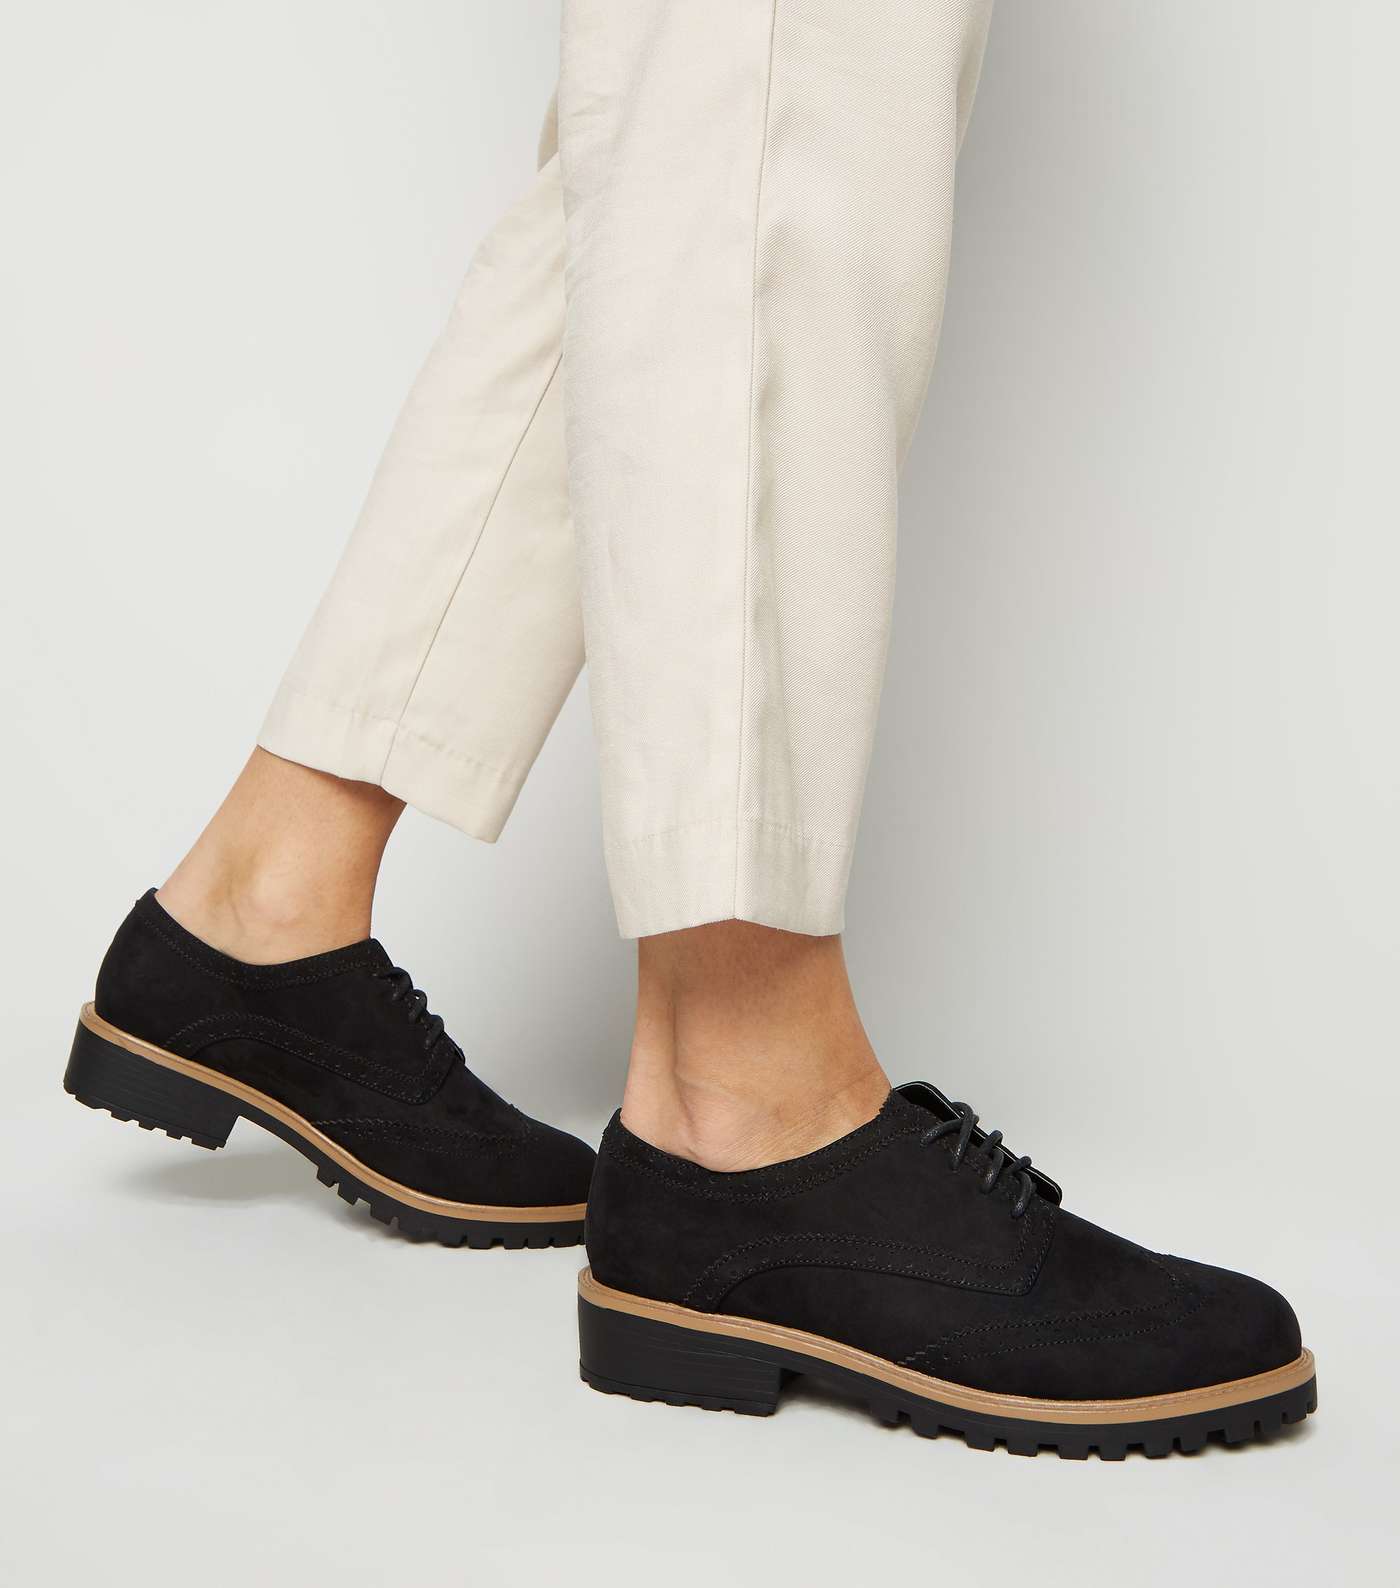 Wide Fit Black Suedette Chunky Brogues Image 2